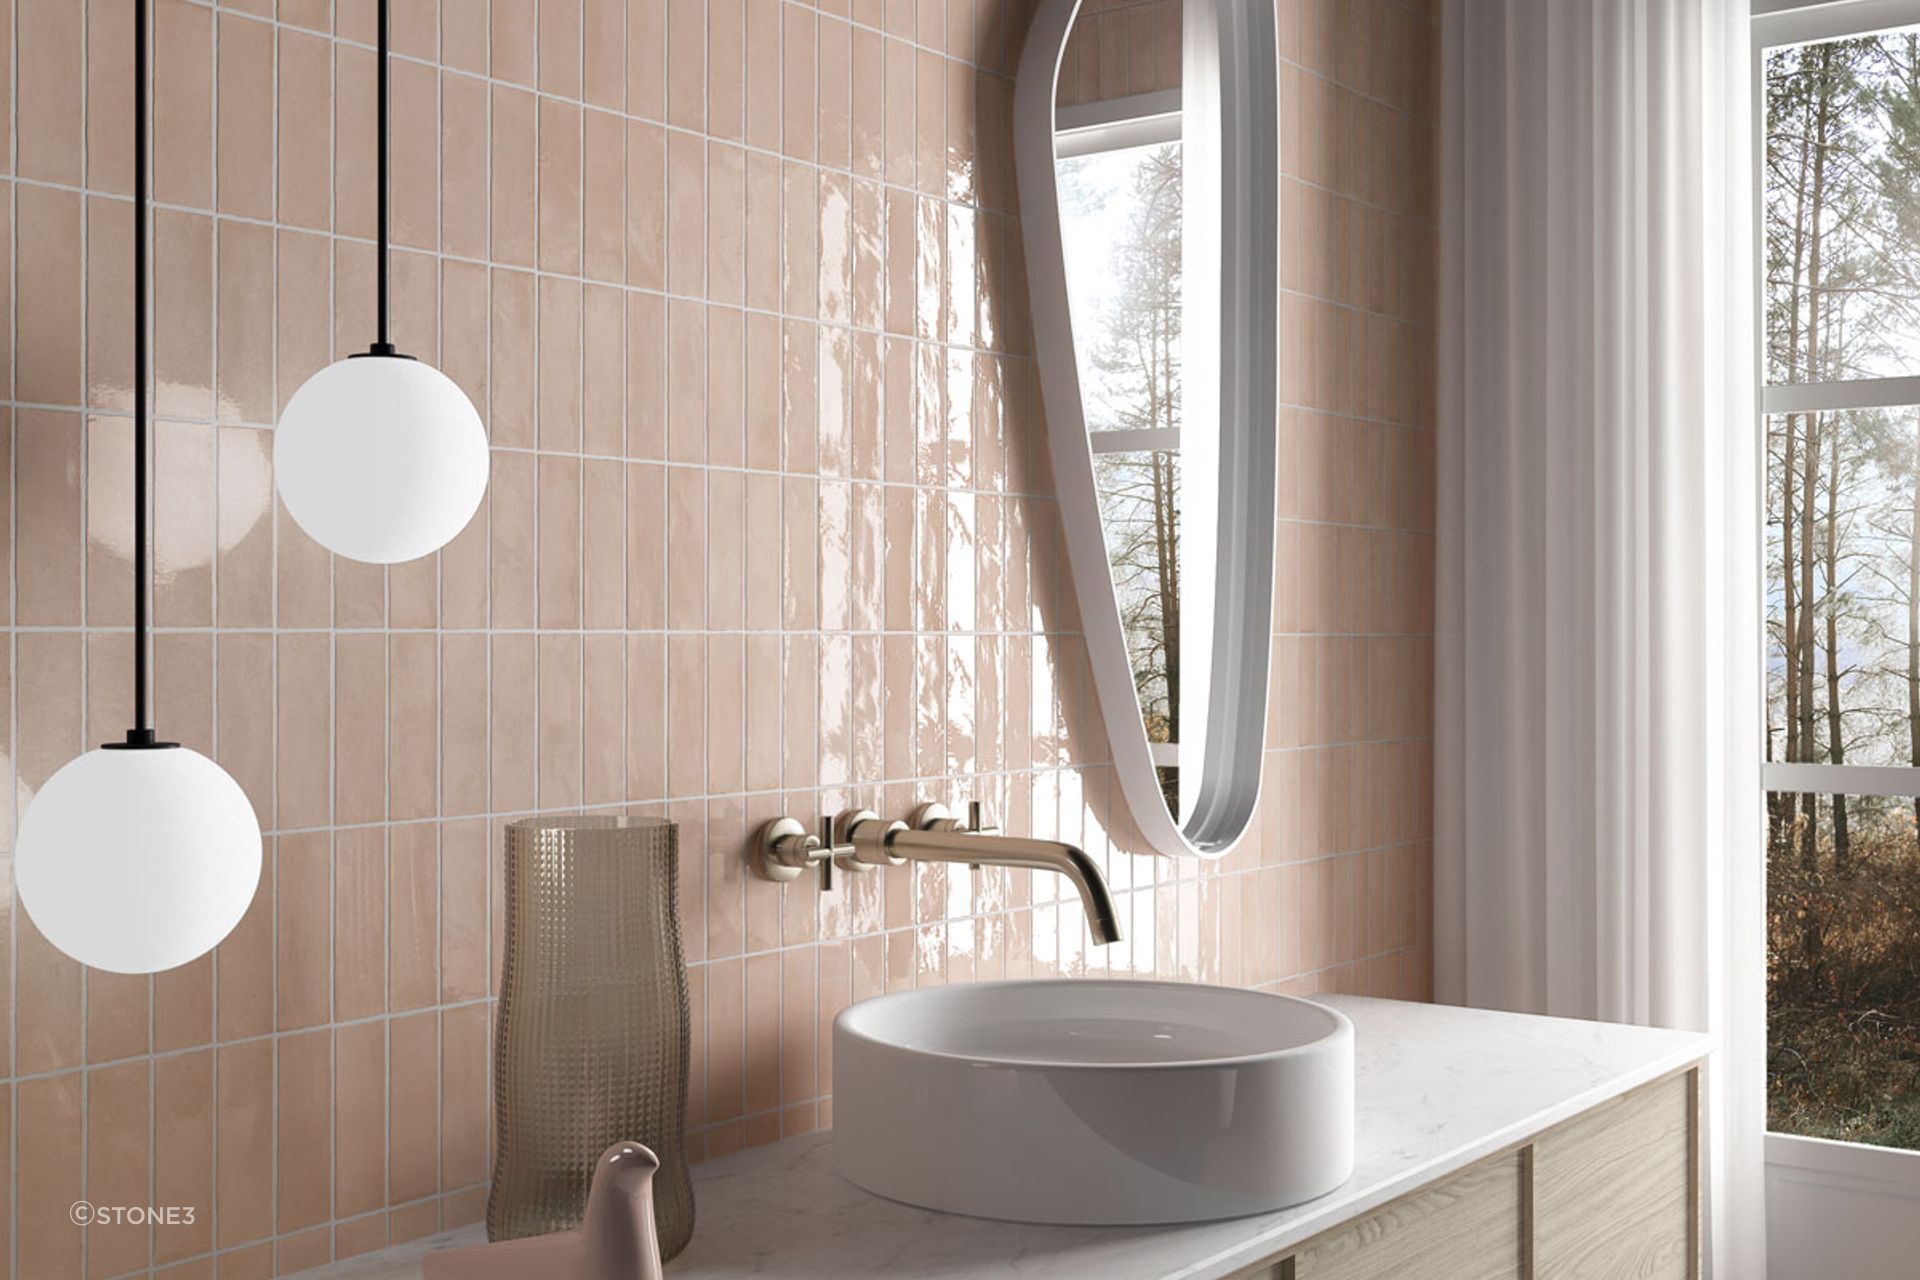 The Coco gloss subway tile in orchard pink | Stone3